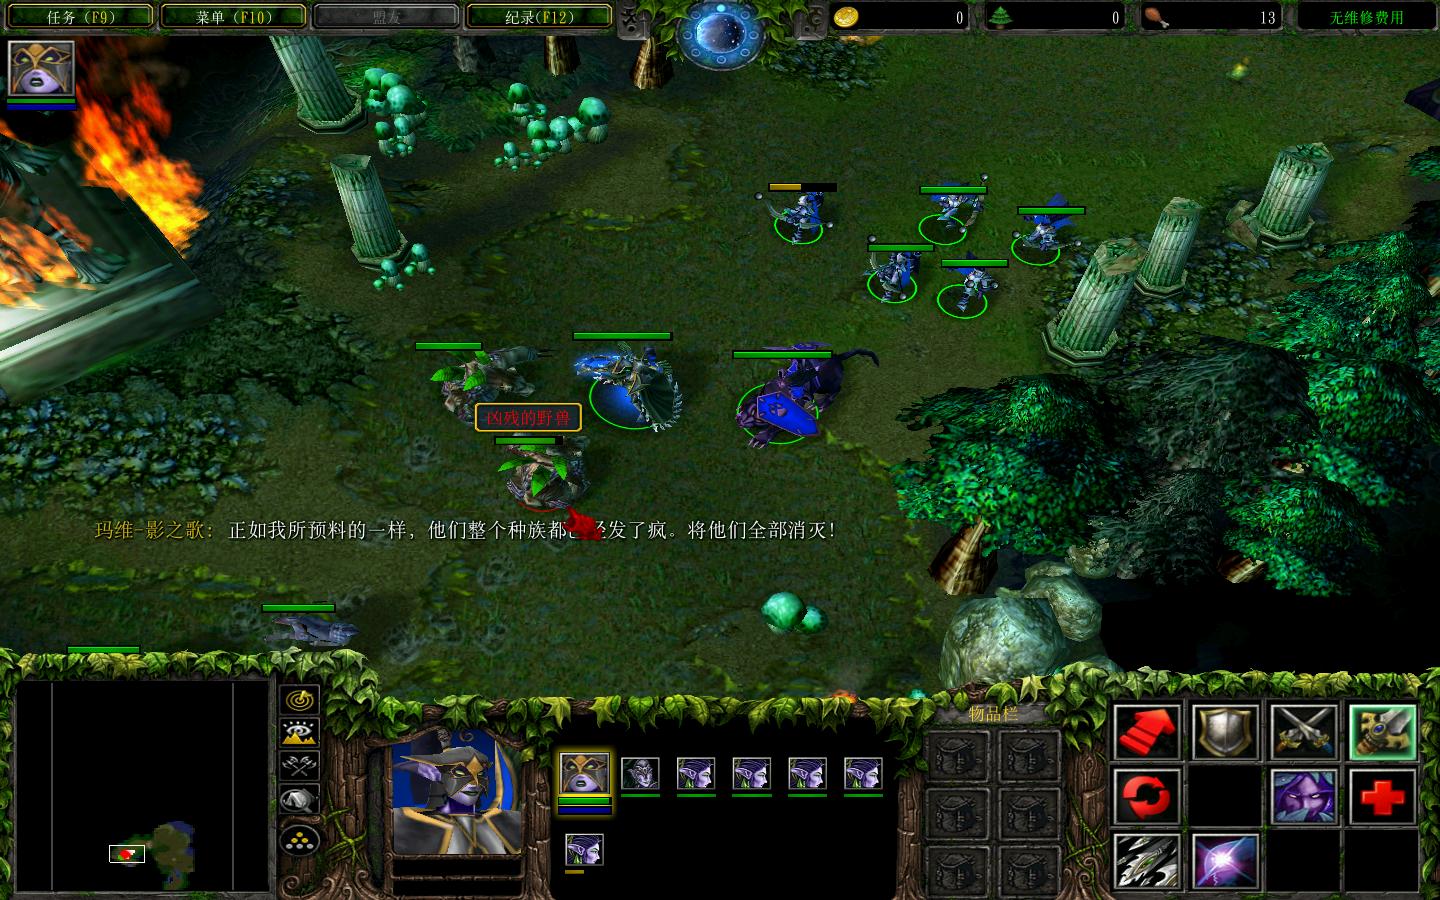 ħ3Warcraft III The Frozen Throne1.24-1.27ӣ԰ v1.2.1ʽ